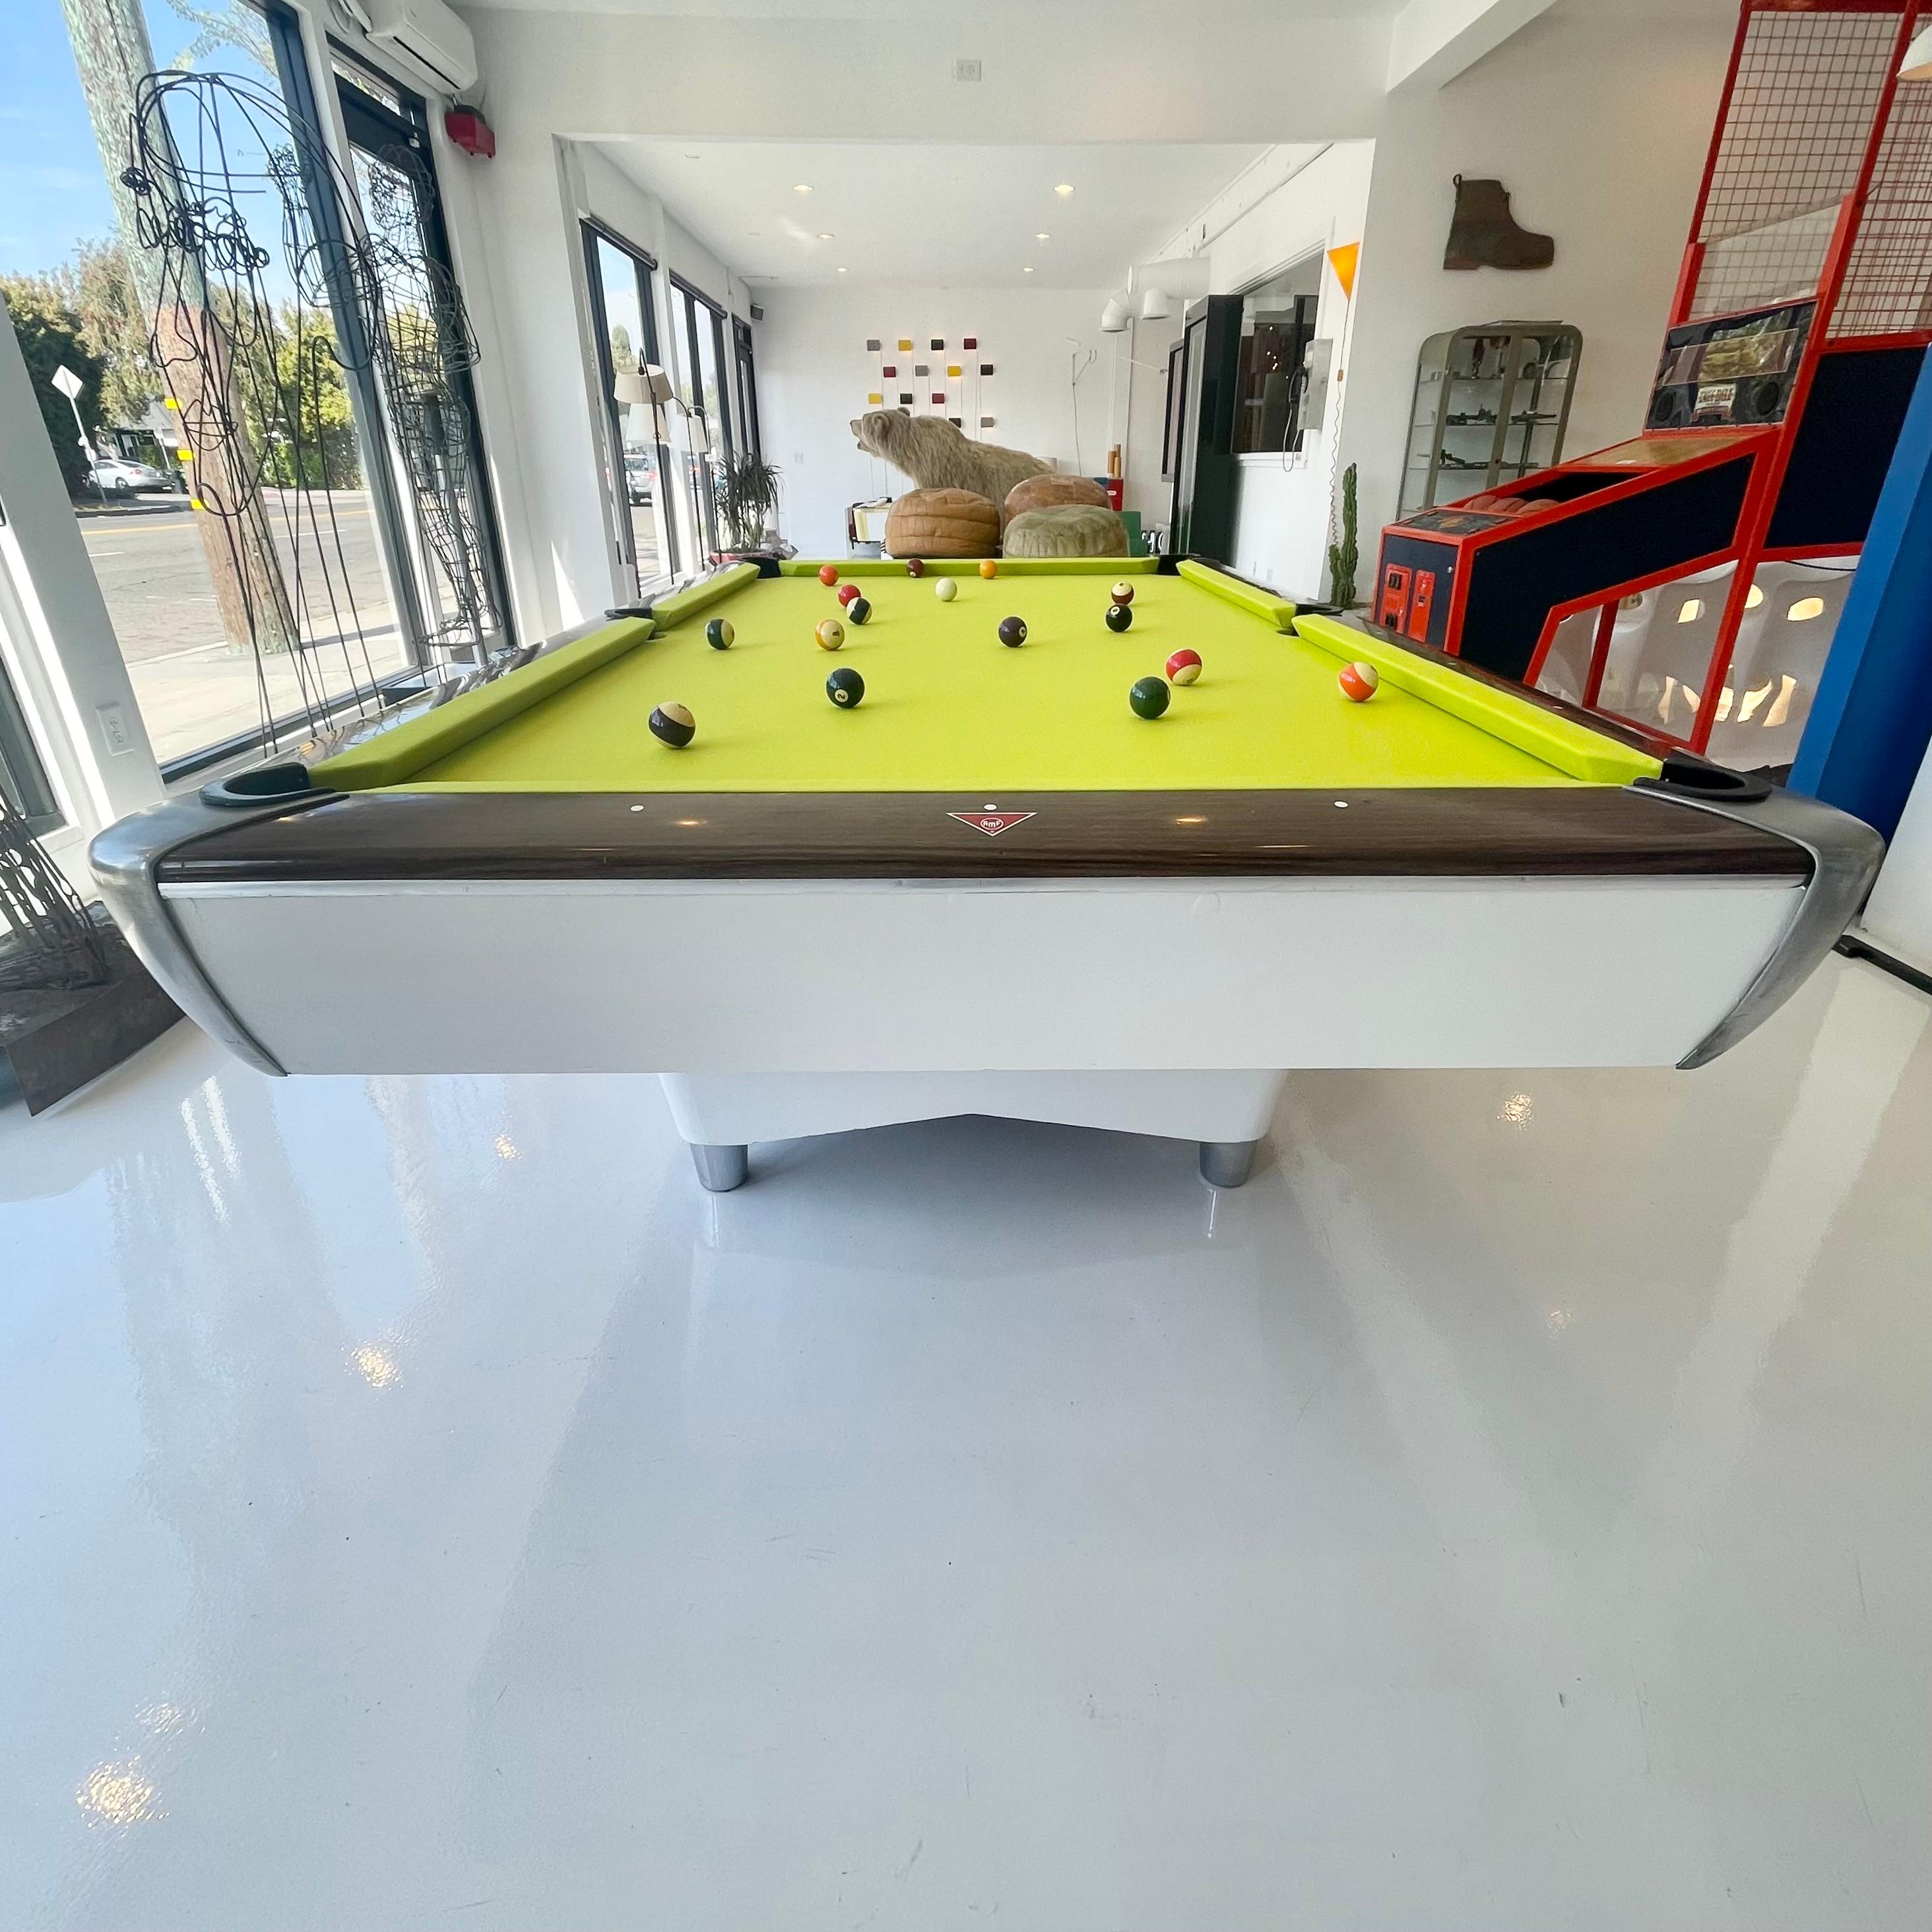 Retro AMF pool table in a stunning slime green felt with wood and chrome accents. Space age lines make this pool table a great statement piece and give it amazing character. Wooden panels and chrome in good condition. Beautiful dual pedestal design